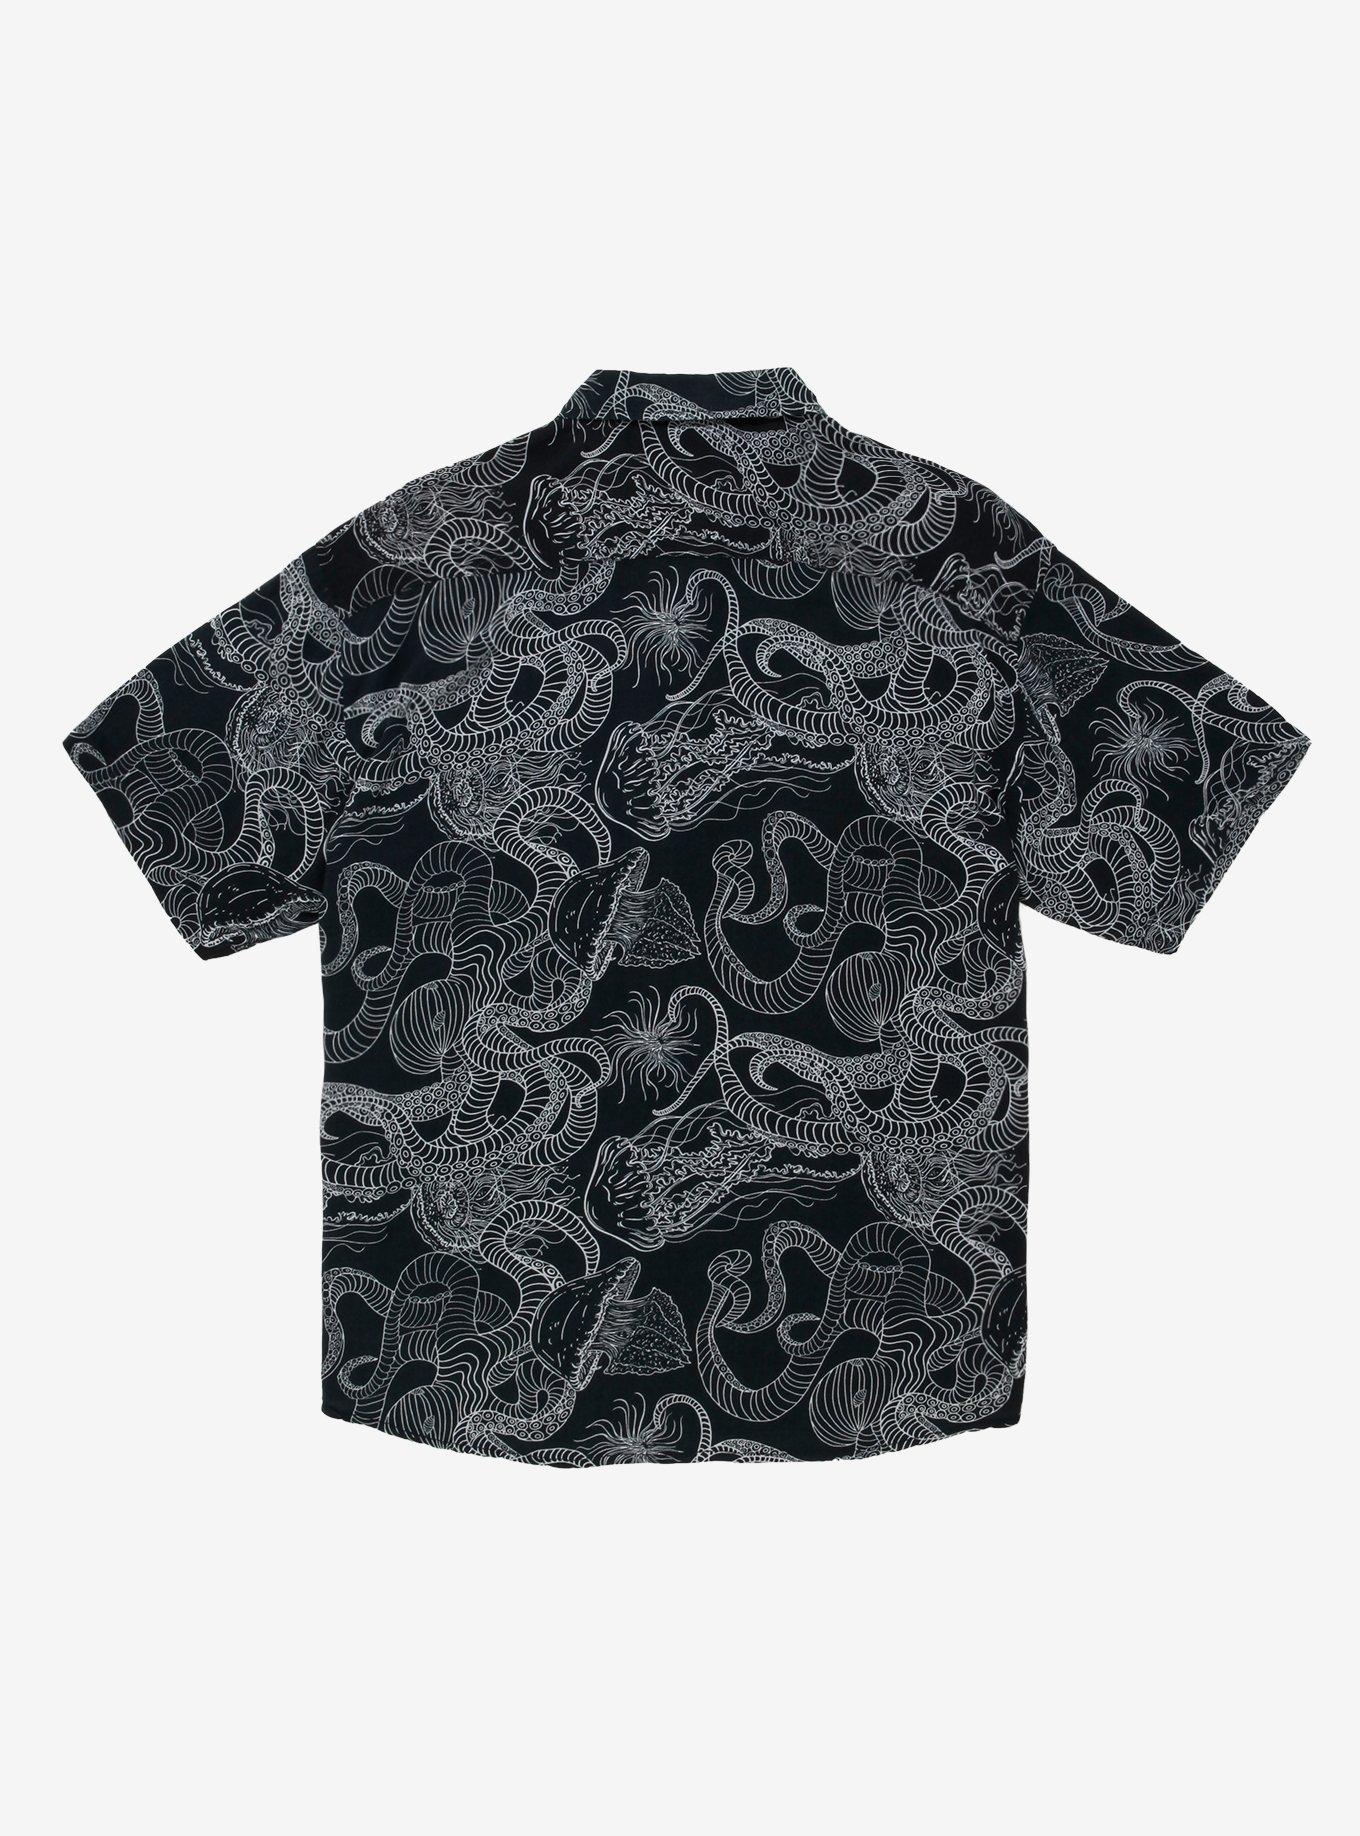 Octopus & Jellyfish Woven Button-Up, ABSTRACT, alternate